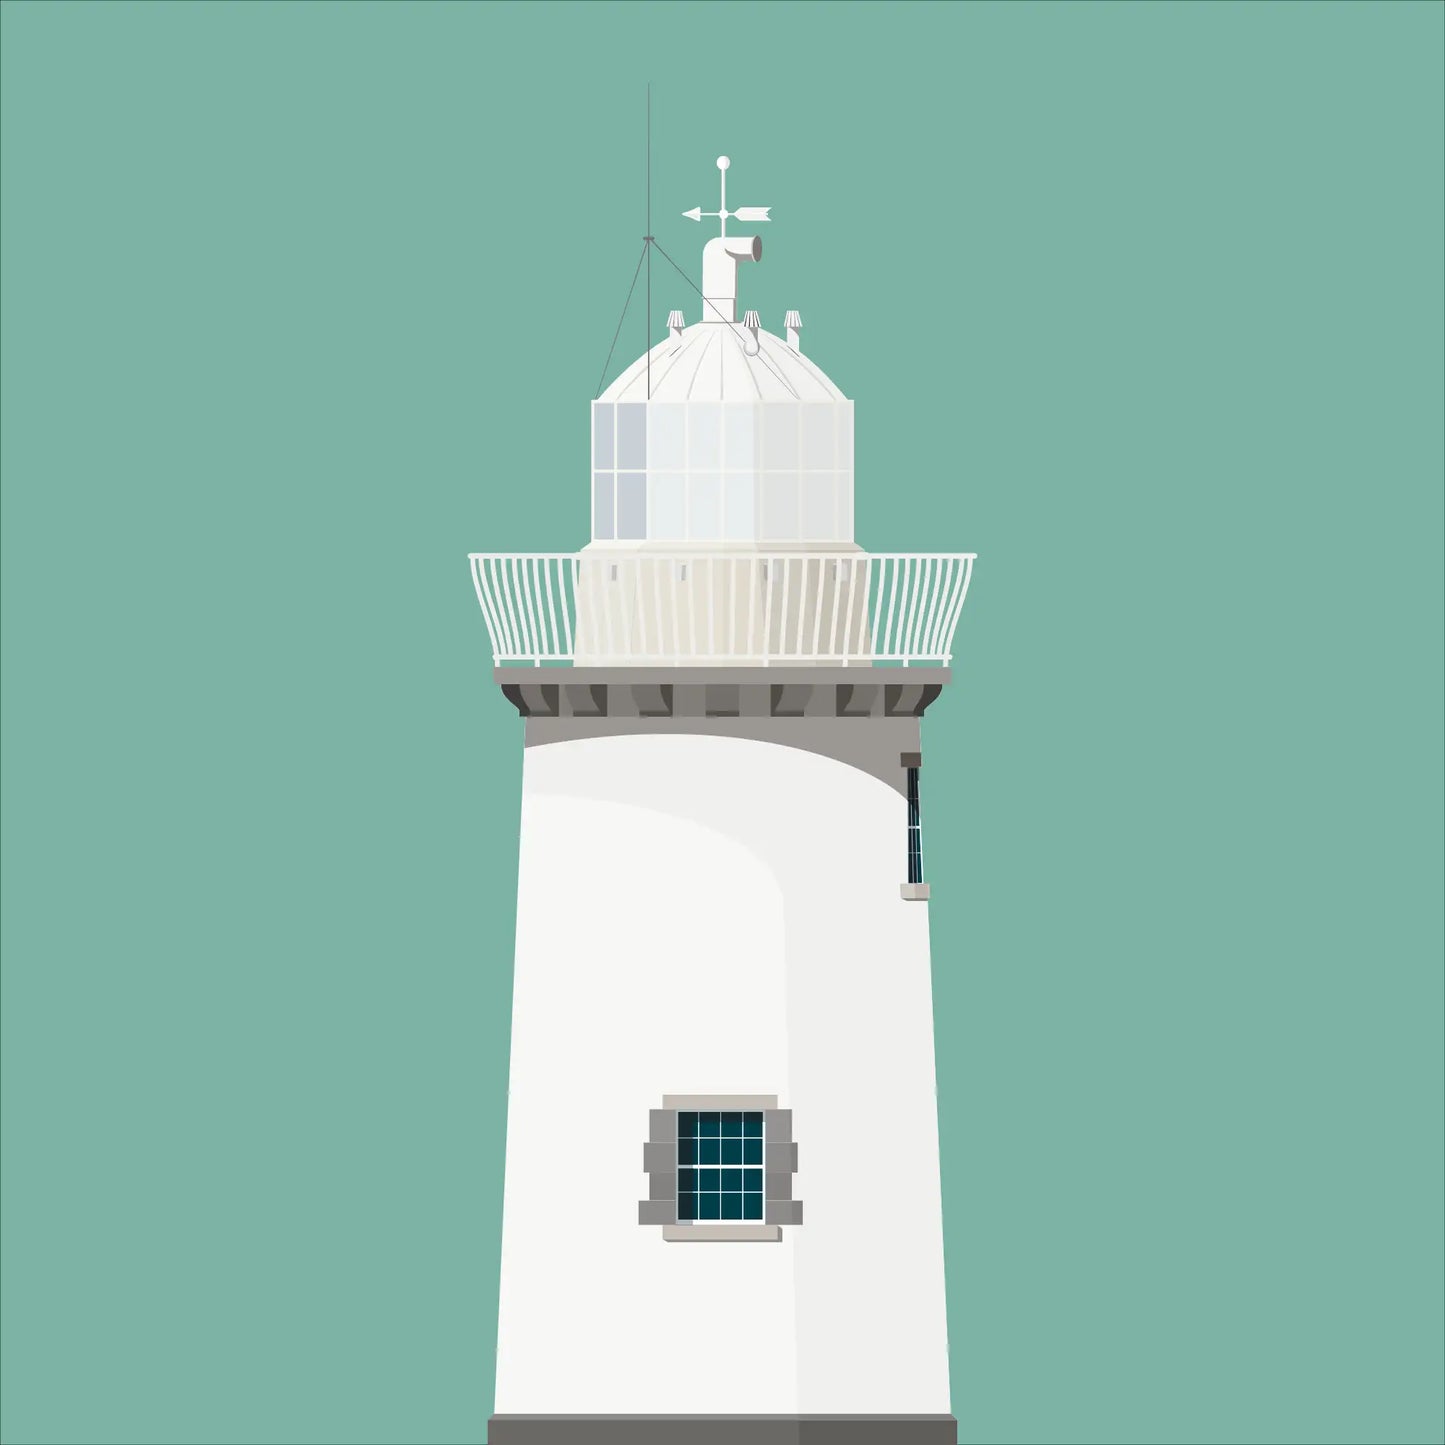 Contemporary graphic illustration of Duncannon North lighthouse on a white background inside light blue square.